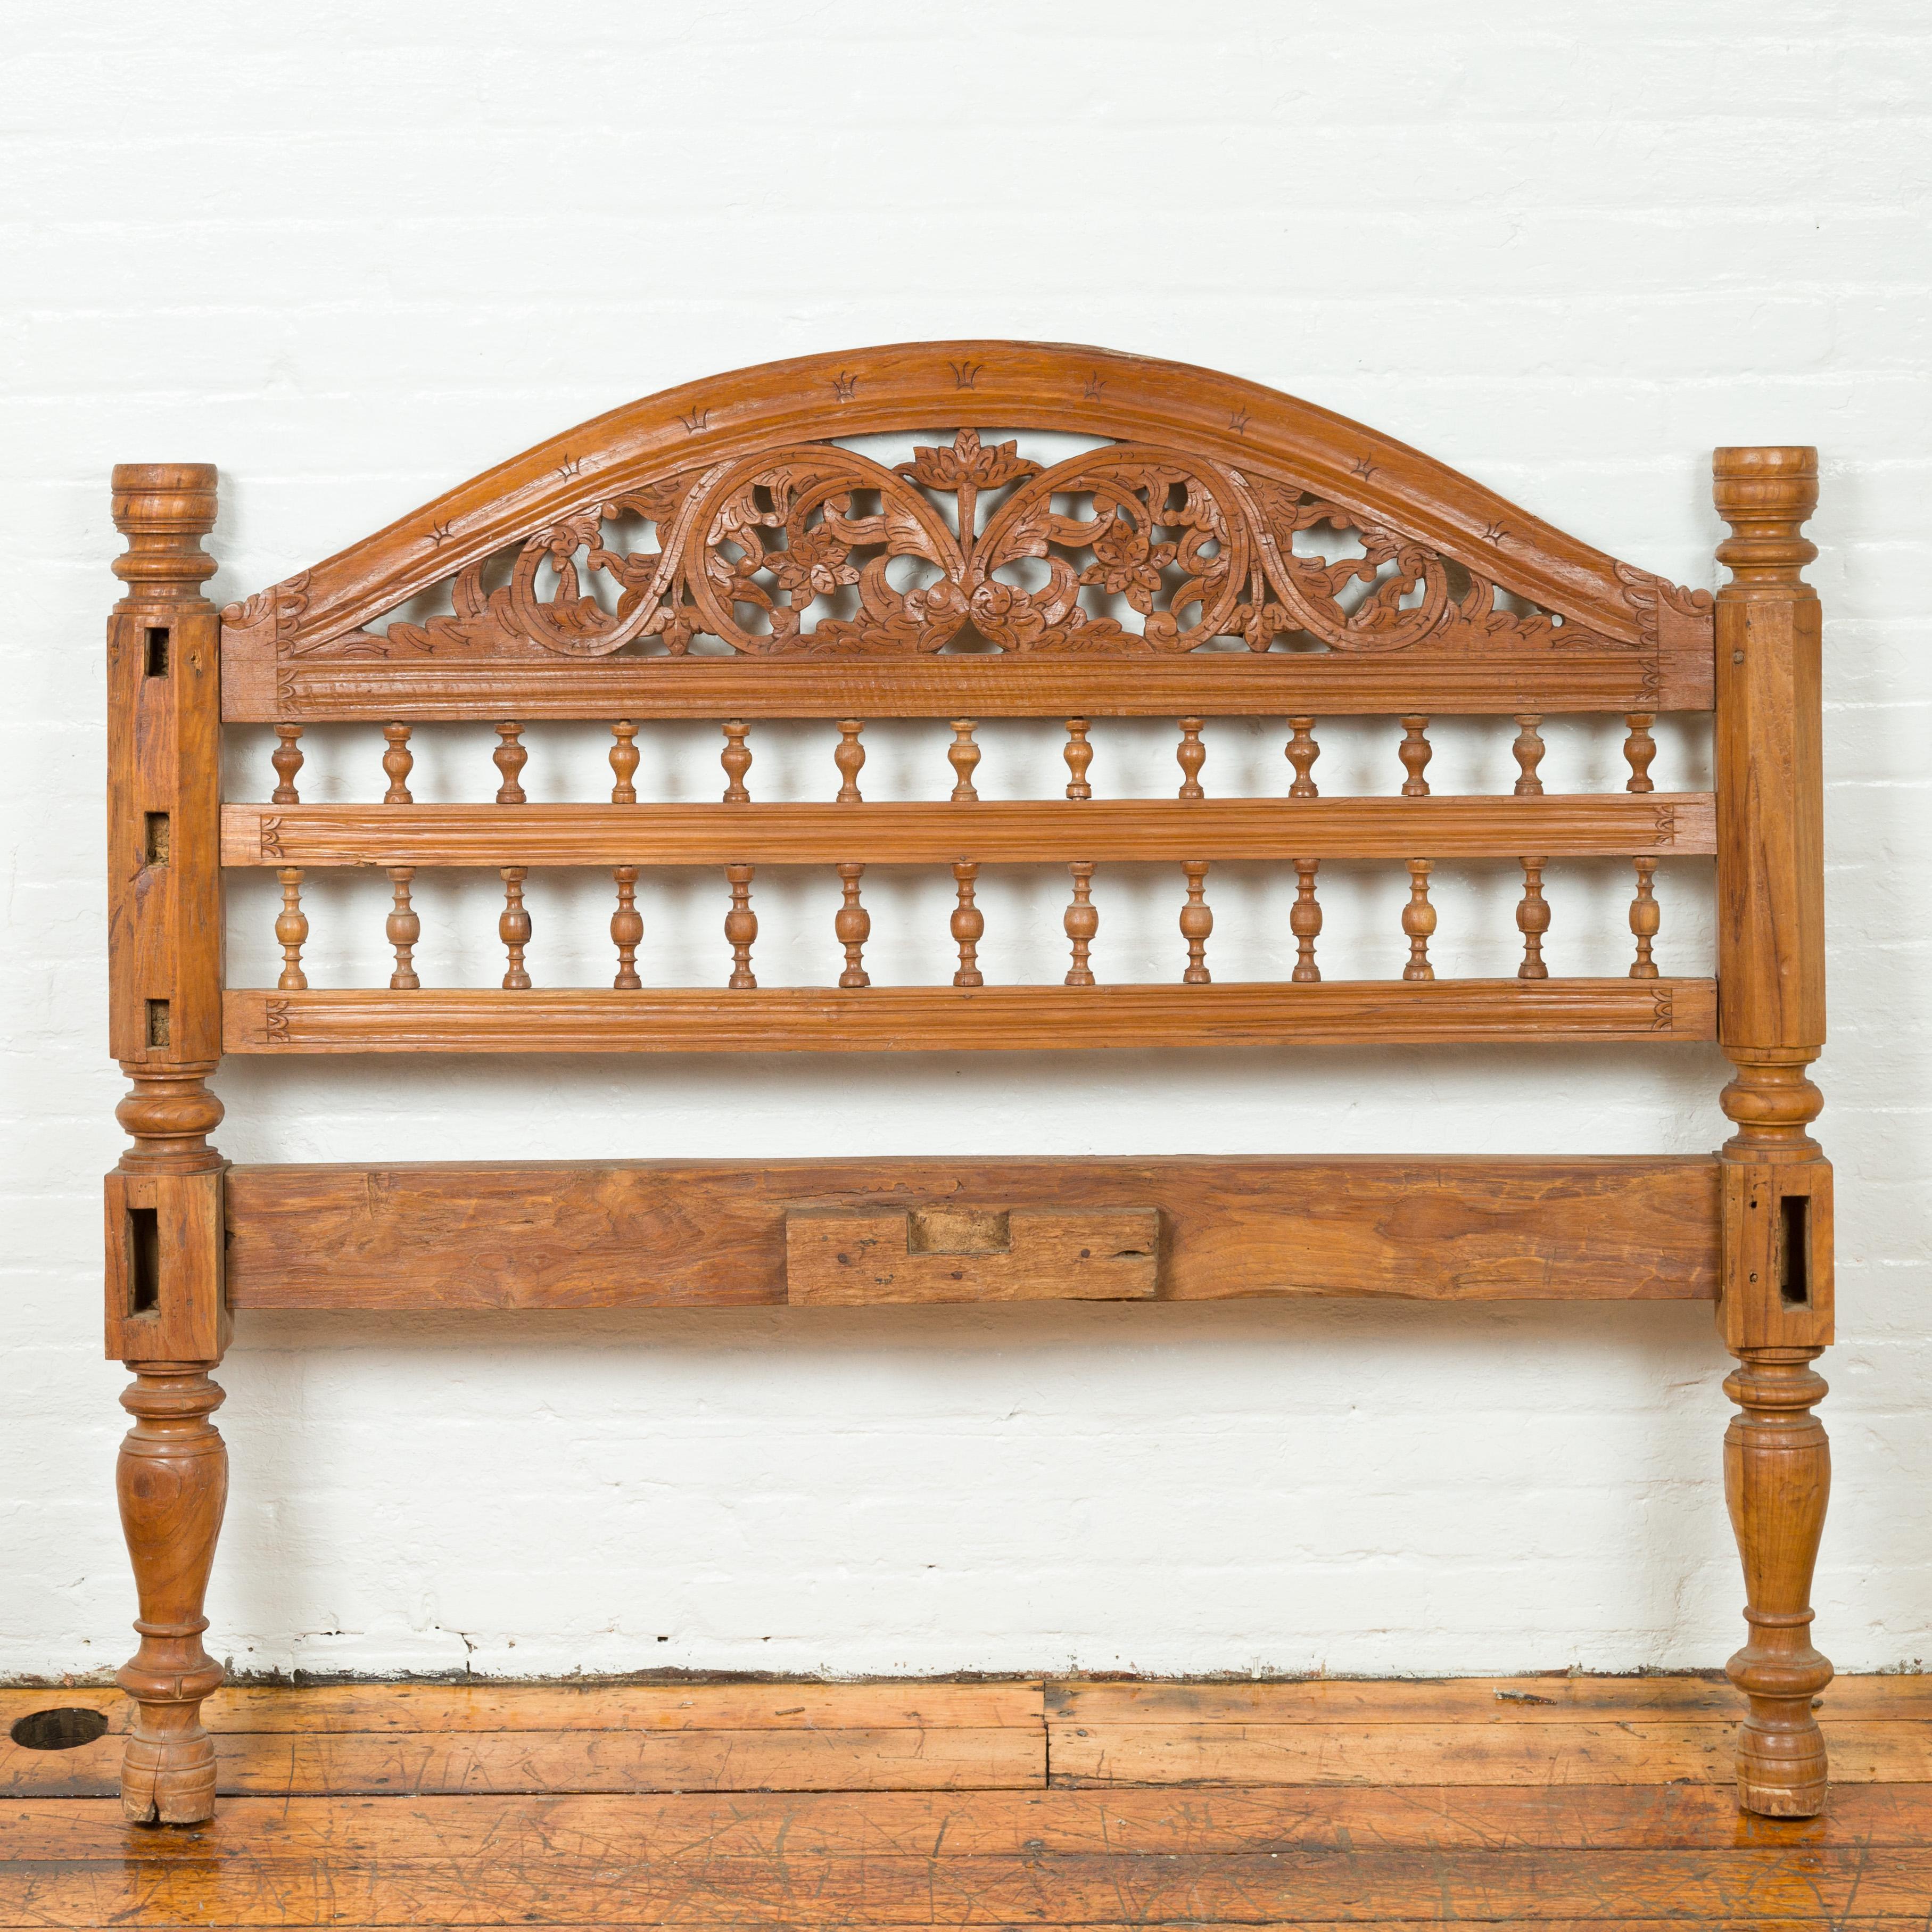 A carved vintage Indonesian headboard from the mid-20th century, with scrolling foliage and petite balusters. Crafted in Indonesia, this carved wooden headboard features a bonnet-shaped upper rail, resting upon delicately carved scrolling foliage.